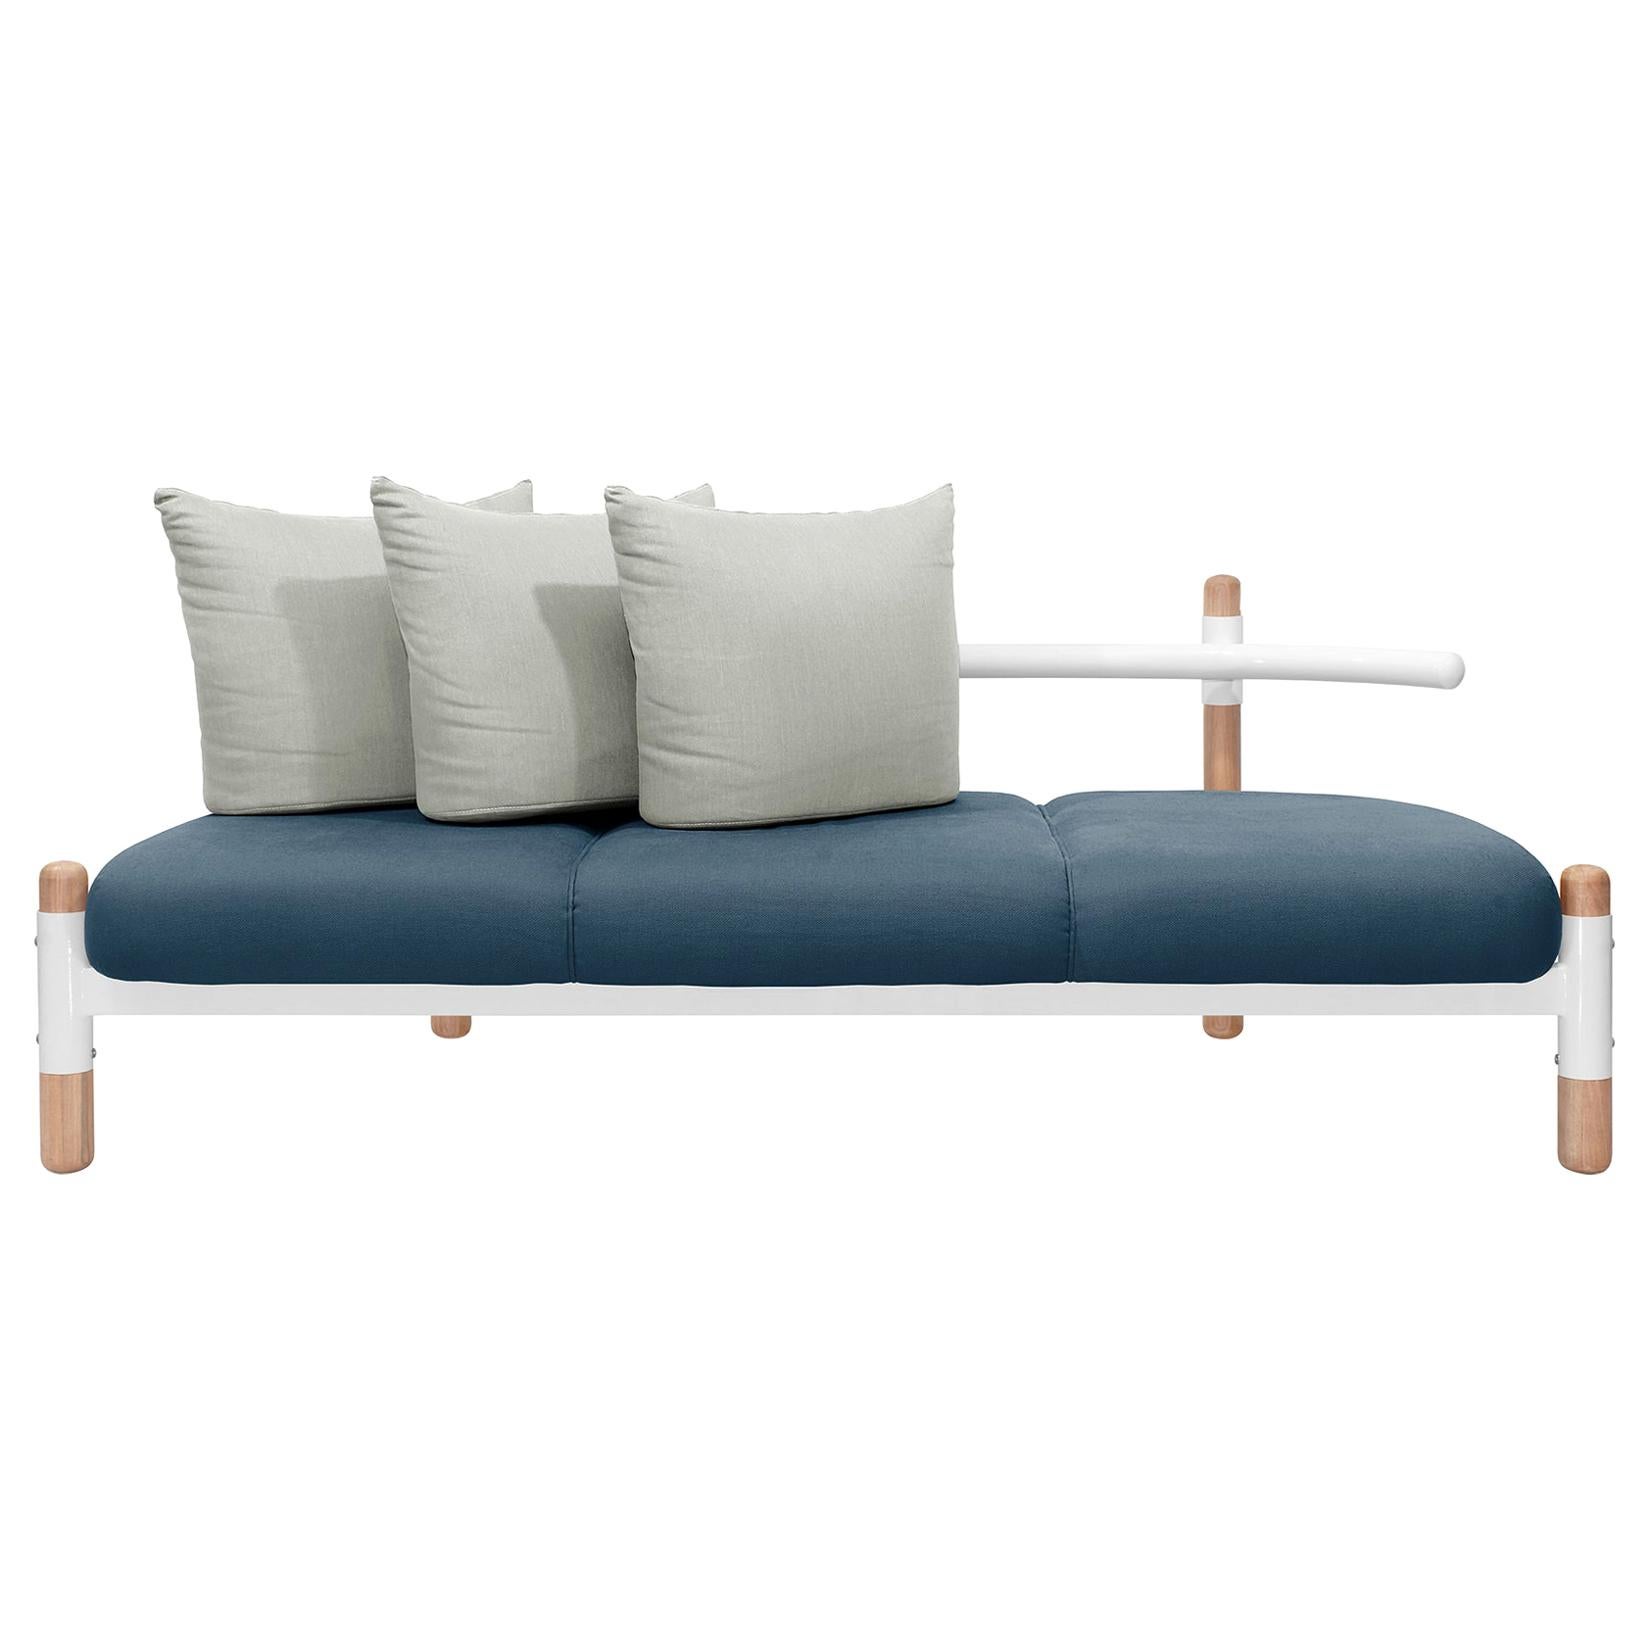 Blue PK15 Three-Seat Sofa, Carbon Steel Structure and Wood Legs by Paulo Kobylka For Sale